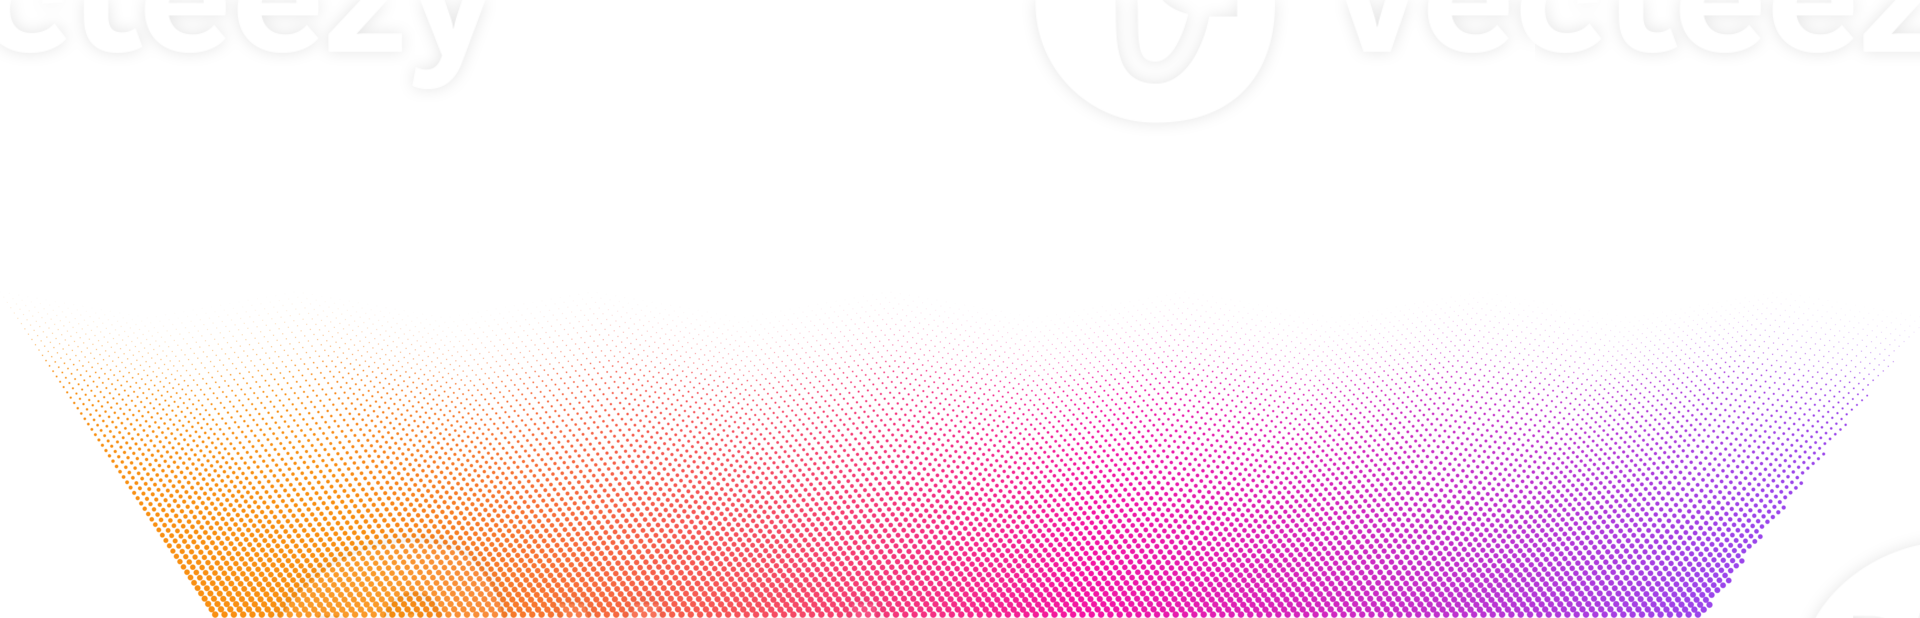 Abstract halftone dots background with dynamic waves png